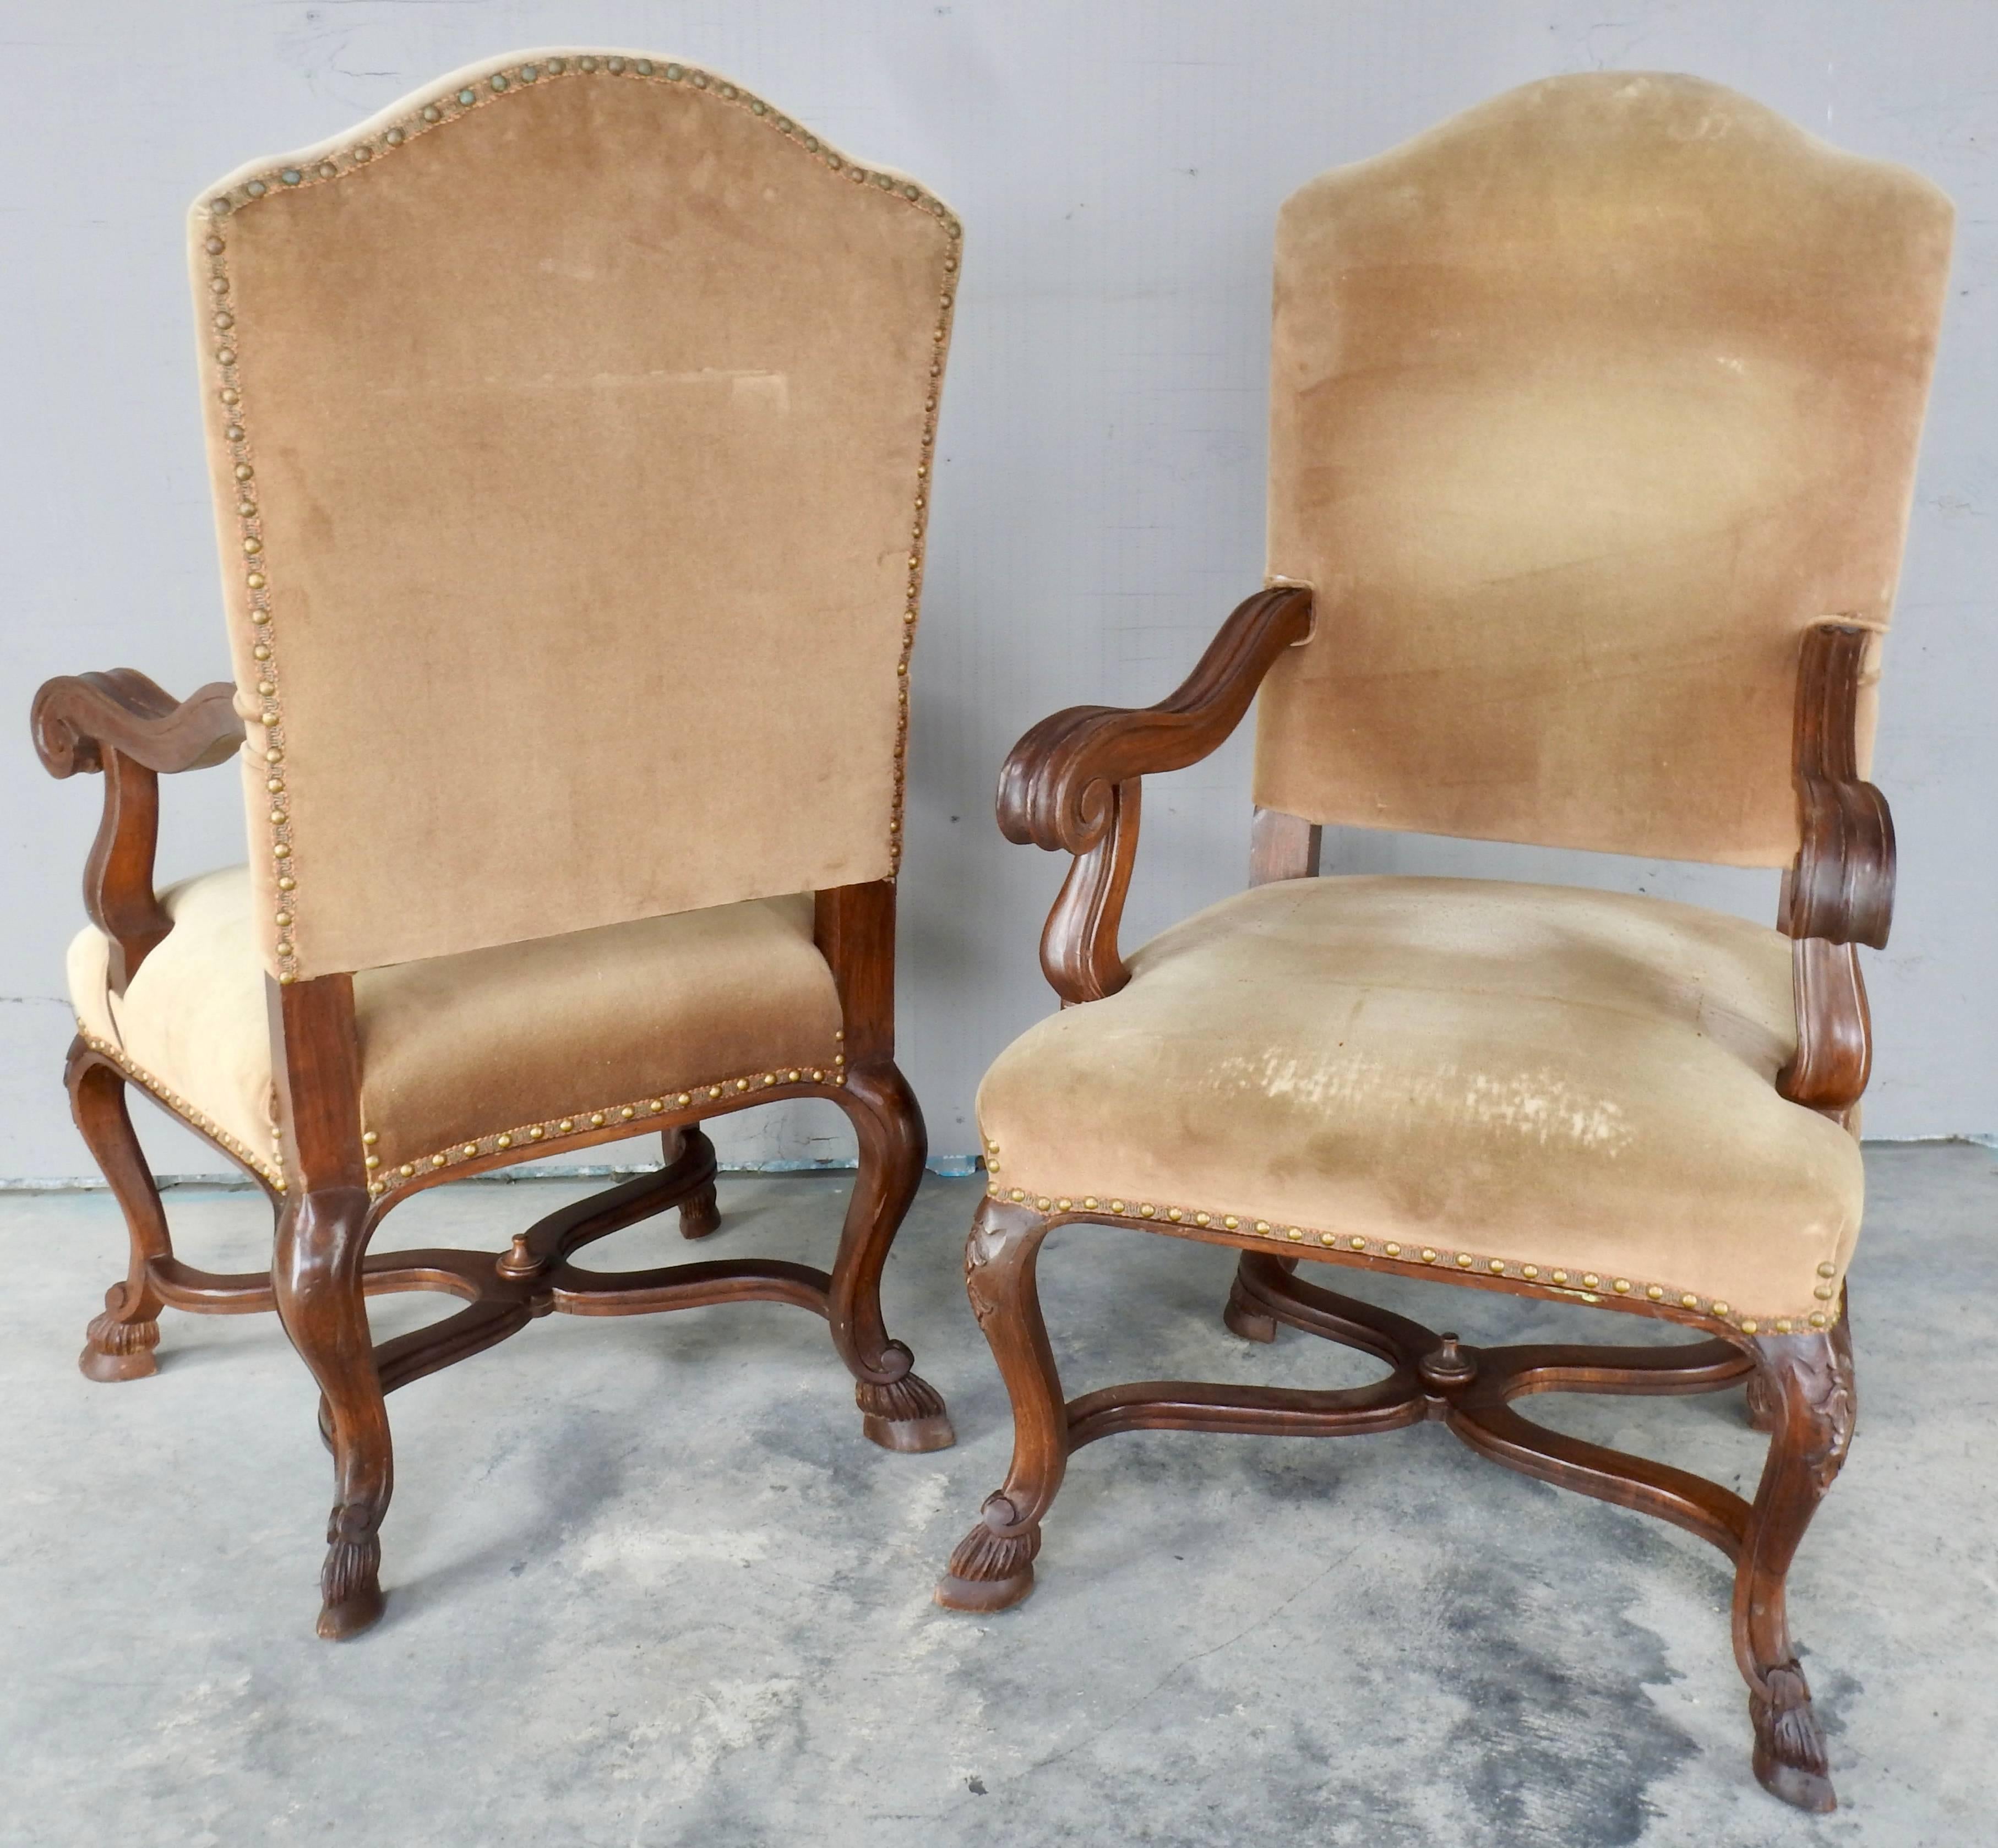 Pair of goat feet chairs feature remarkable carving. Richly carved knees along with scrolled arms add to the character of these chairs. Rich natural tone fabric has brass nailhead trim on top of gimp trim.